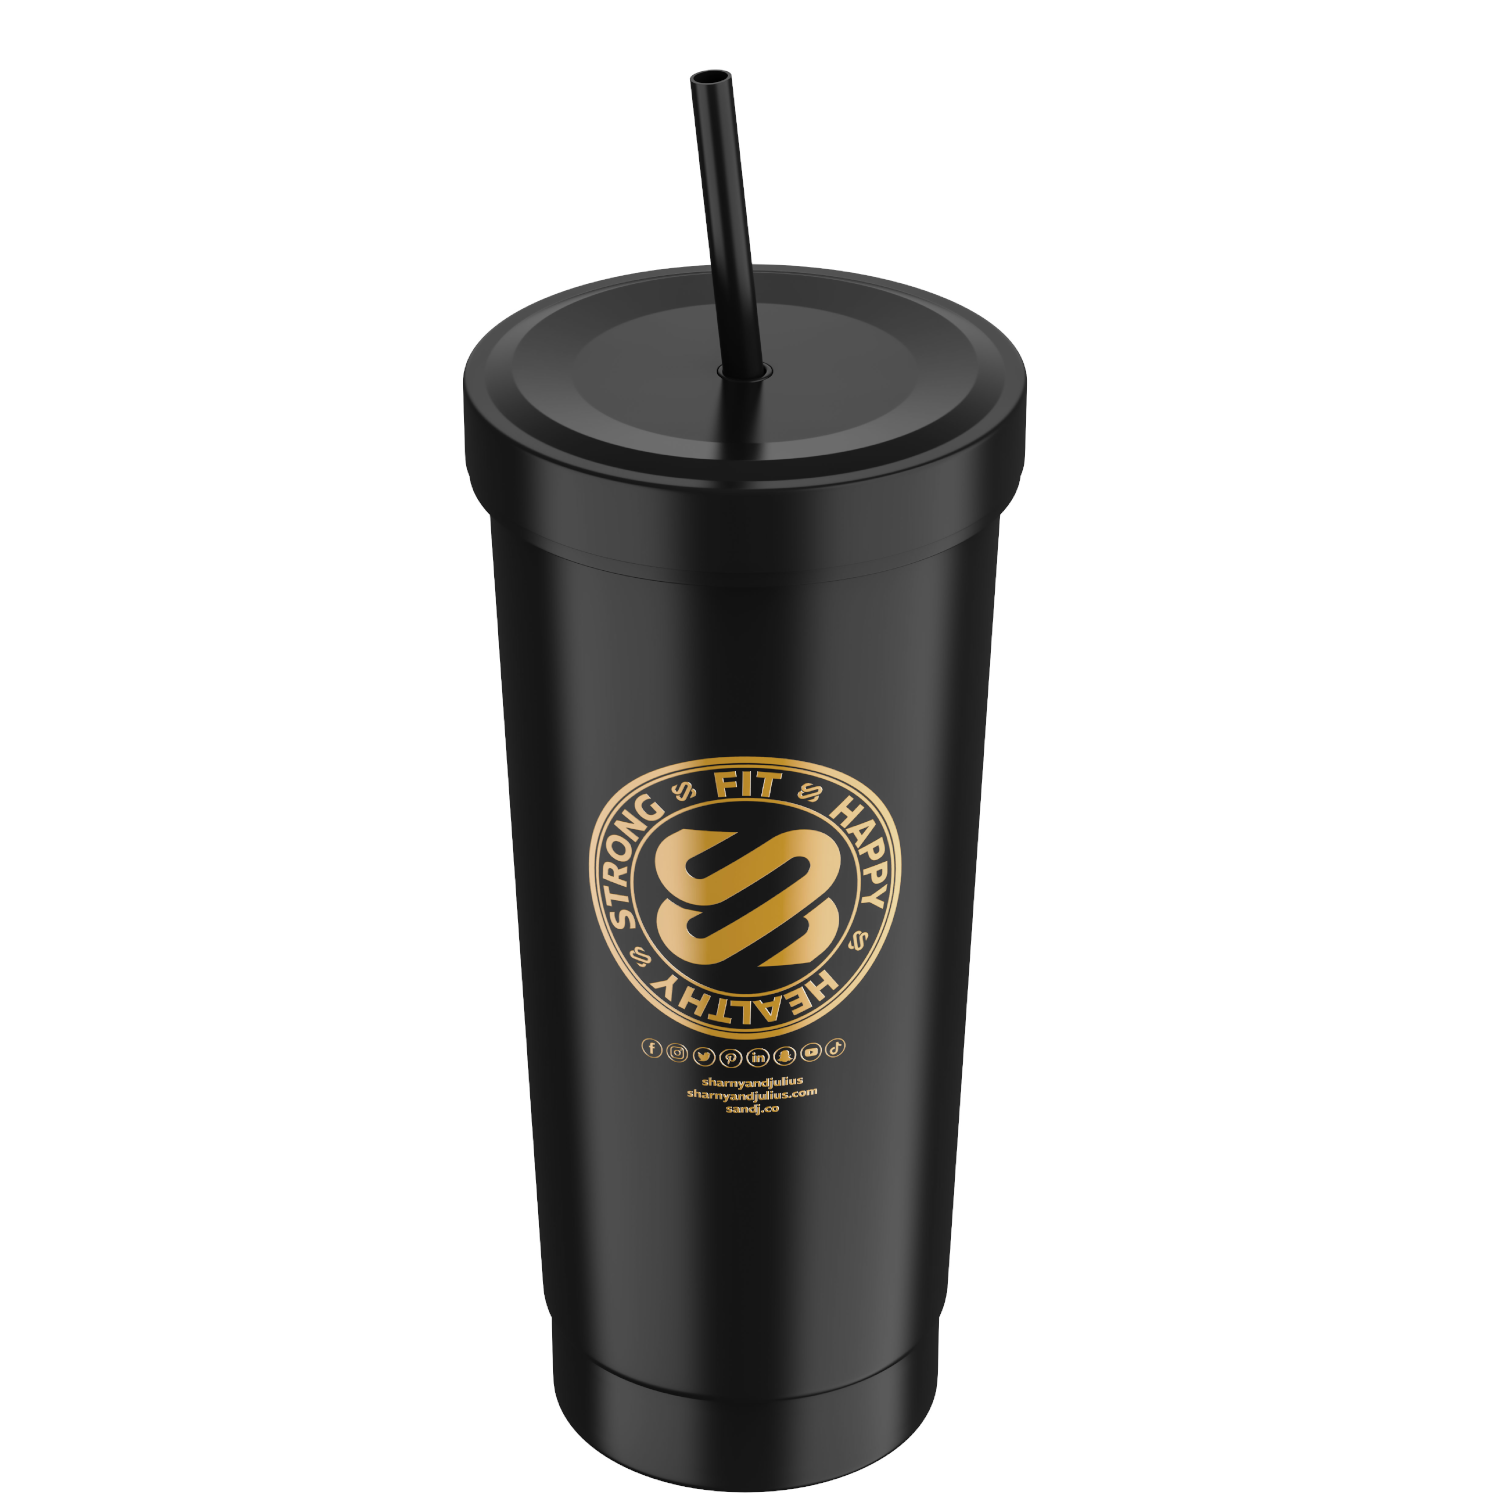 Stainless Steel Drinking Straw - James Coffee Co.